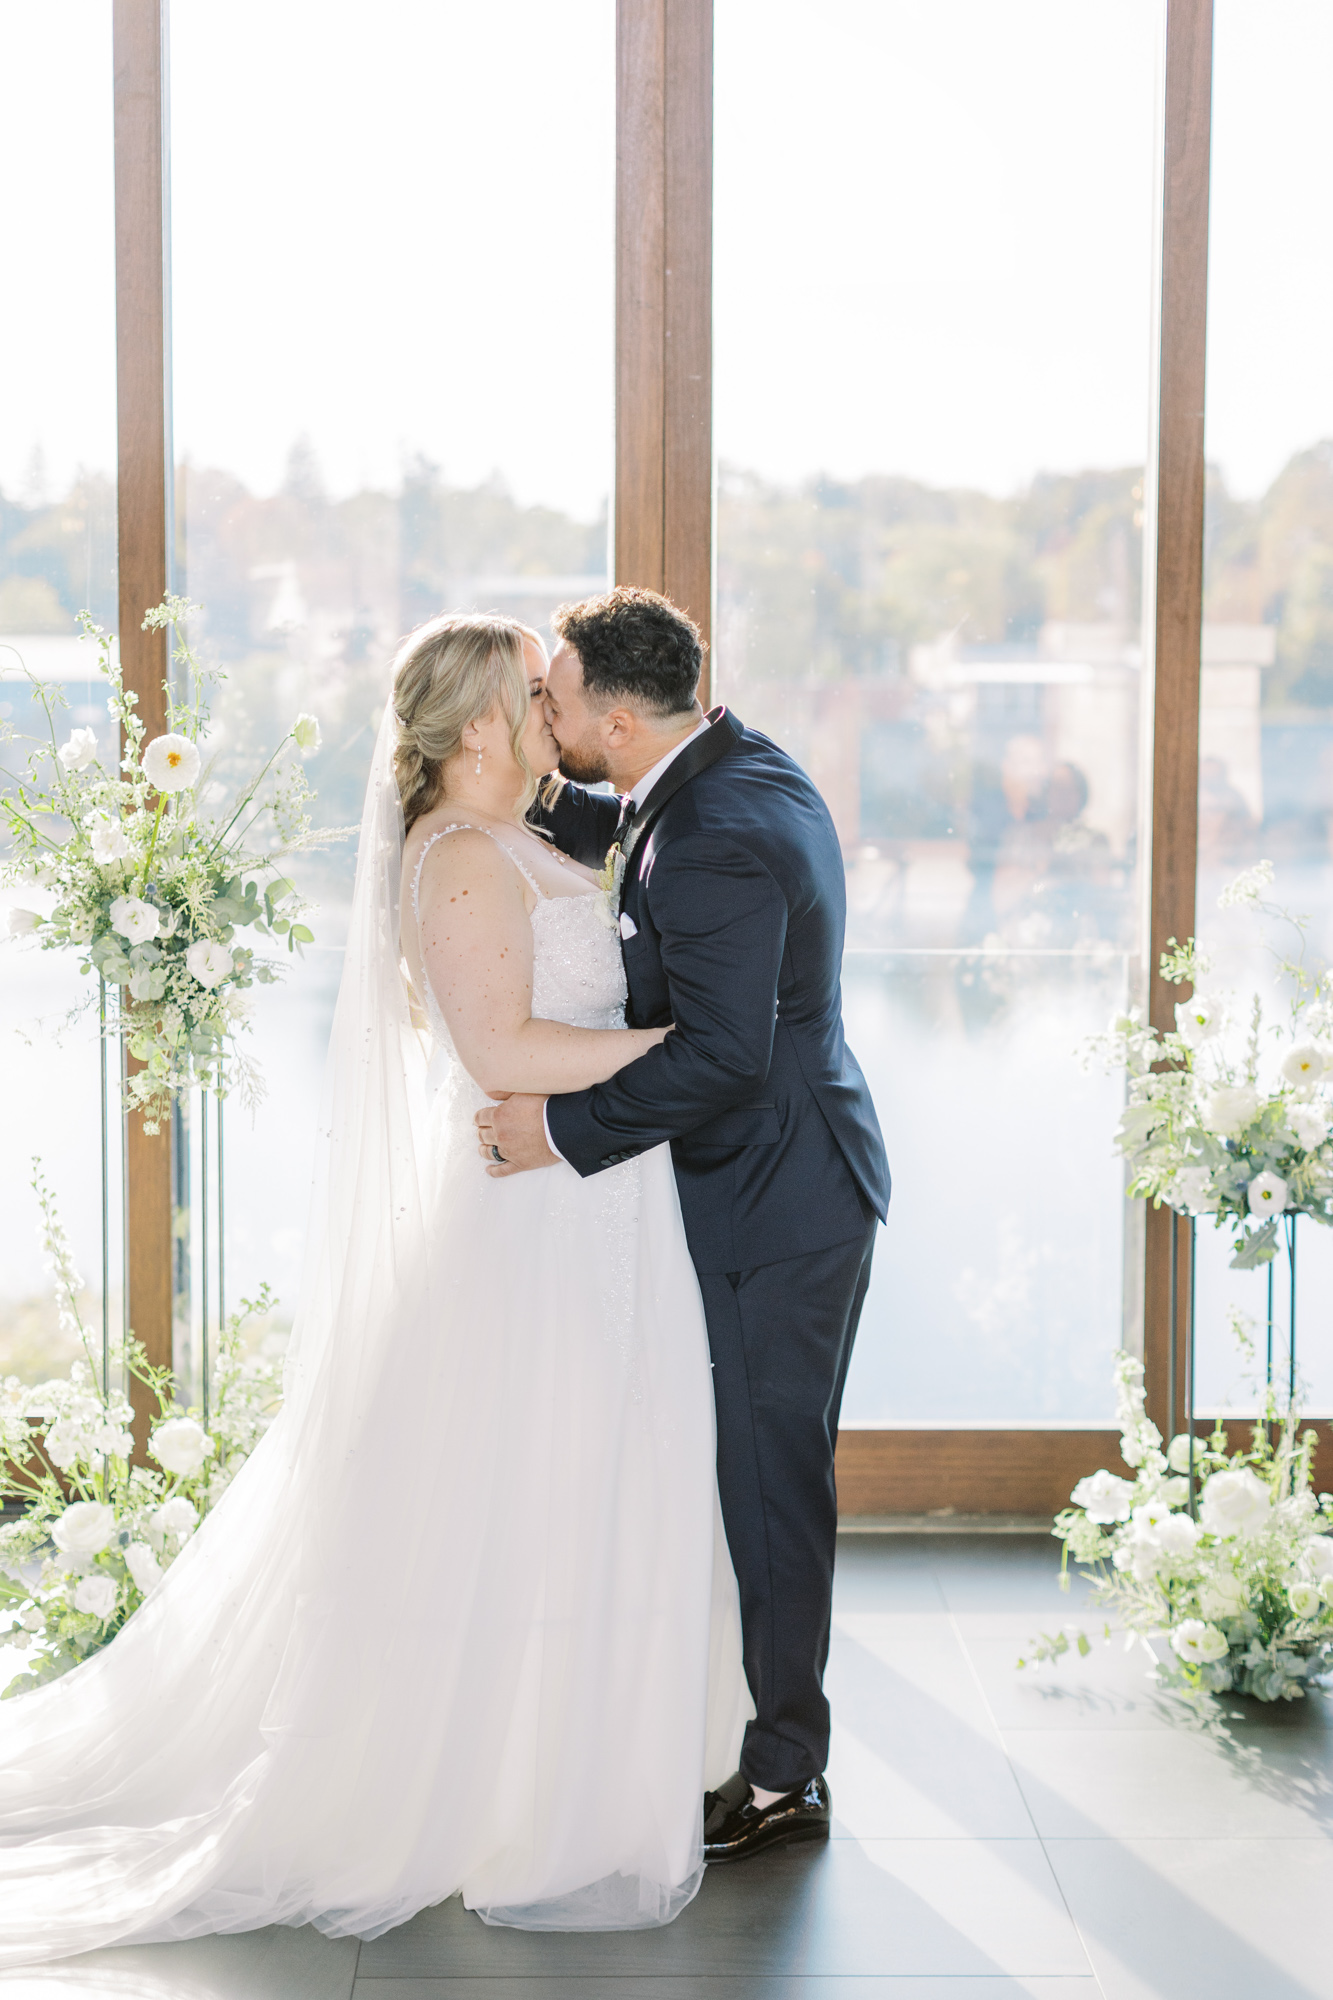 First kiss of bride and groom during wedding at Cambridge mill